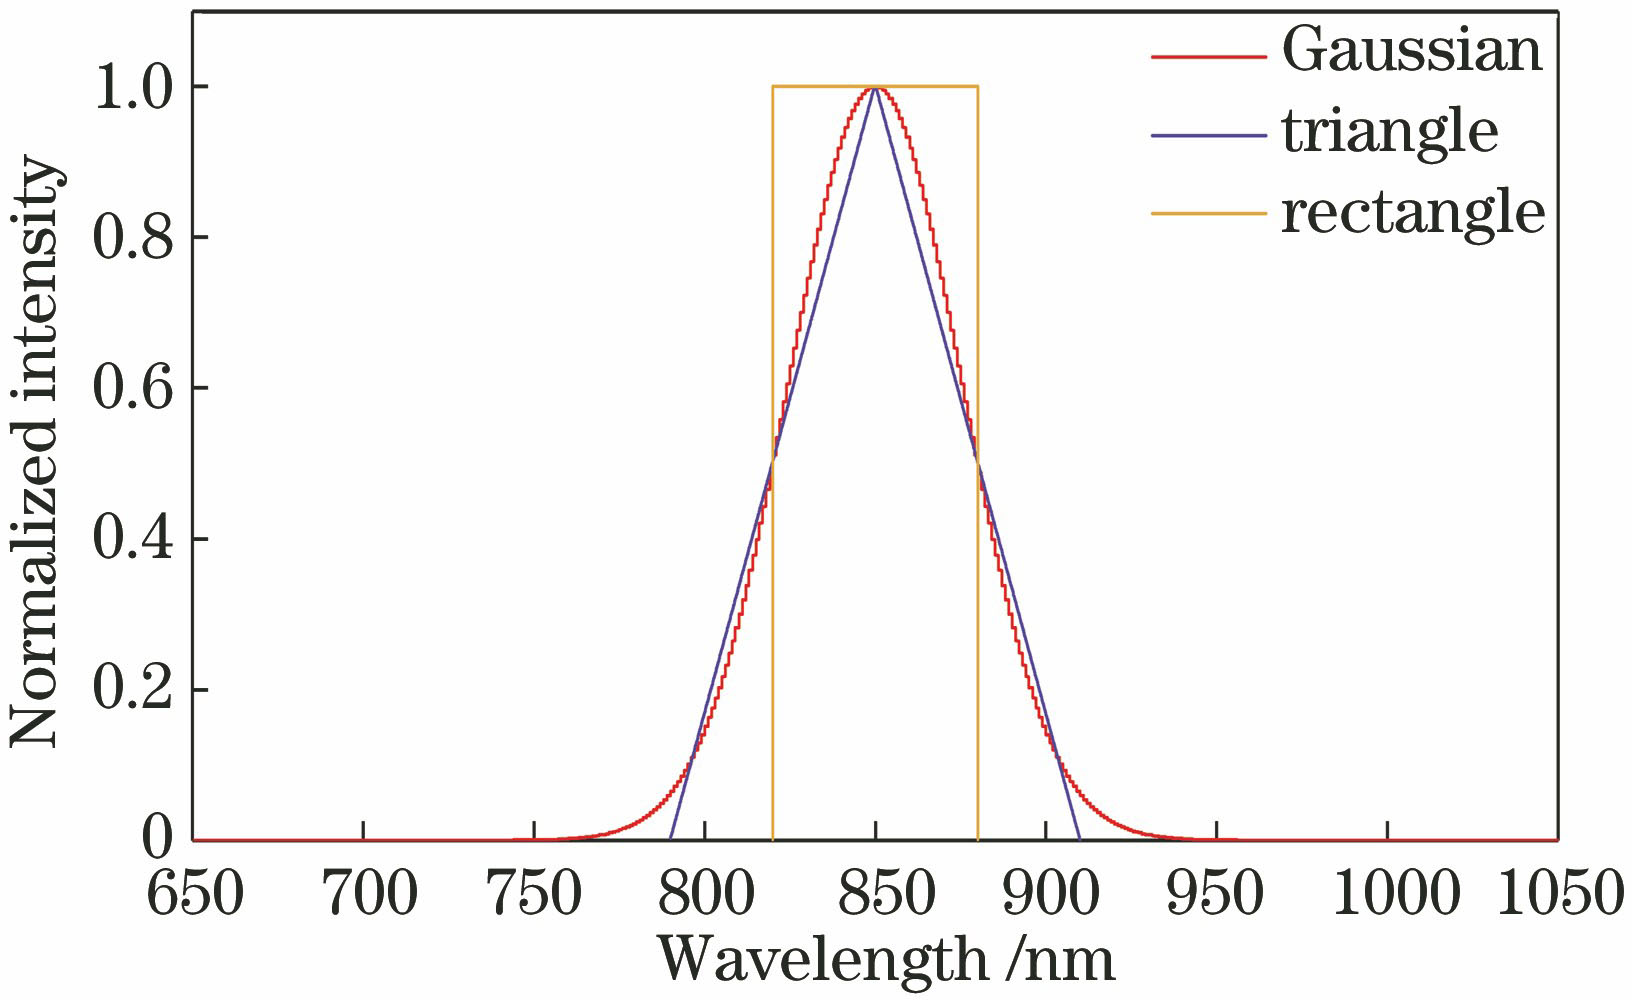 Spectral distribution curves of three kinds of light sources